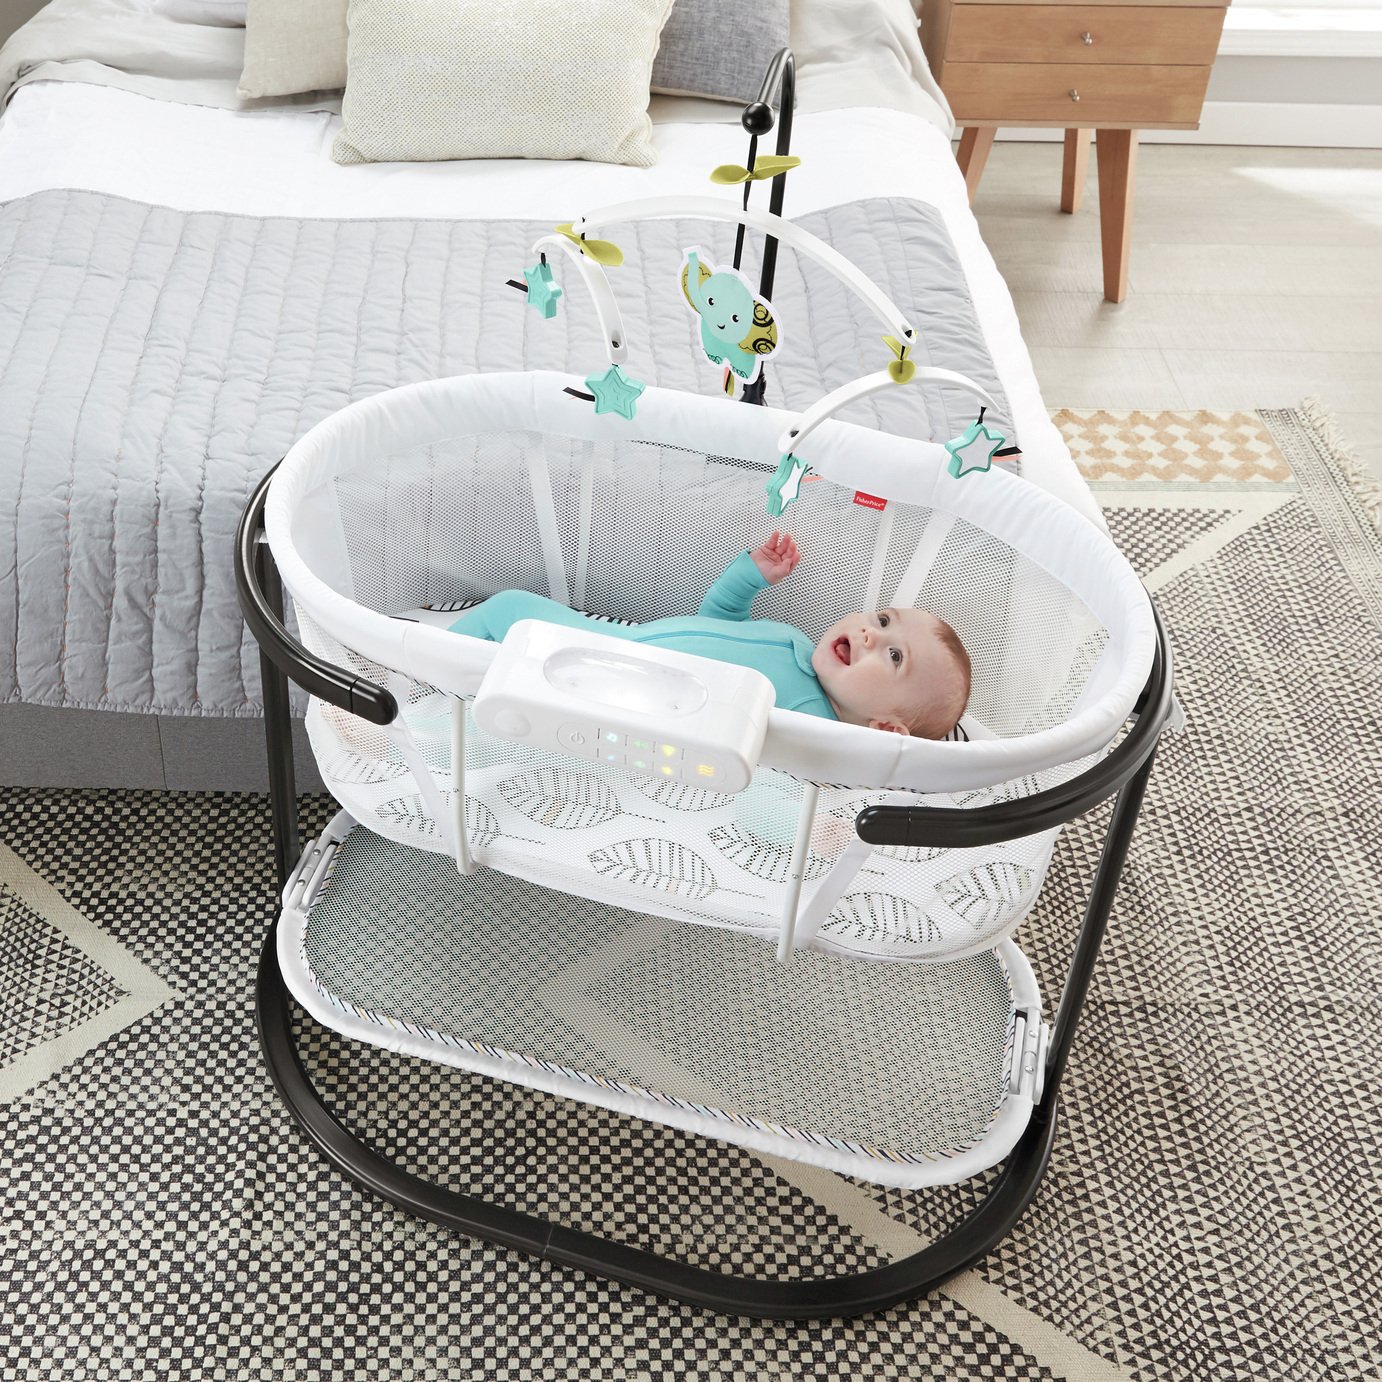 fisher price smooth motion bassinet